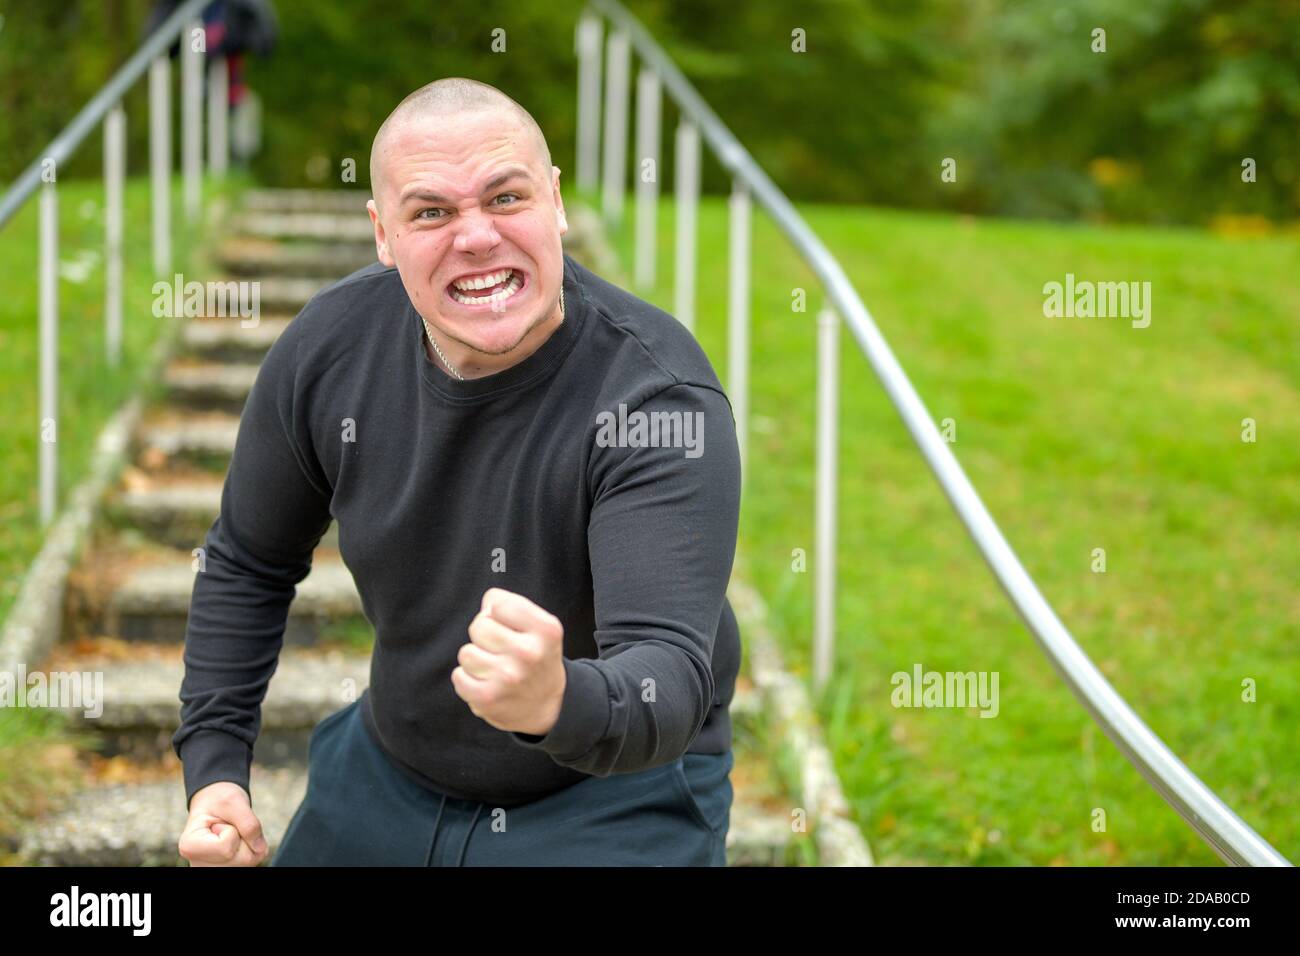 Angry man threatening the camera with his fist as he screams abuse with a vehement expression on outdoors steps in a park Stock Photo